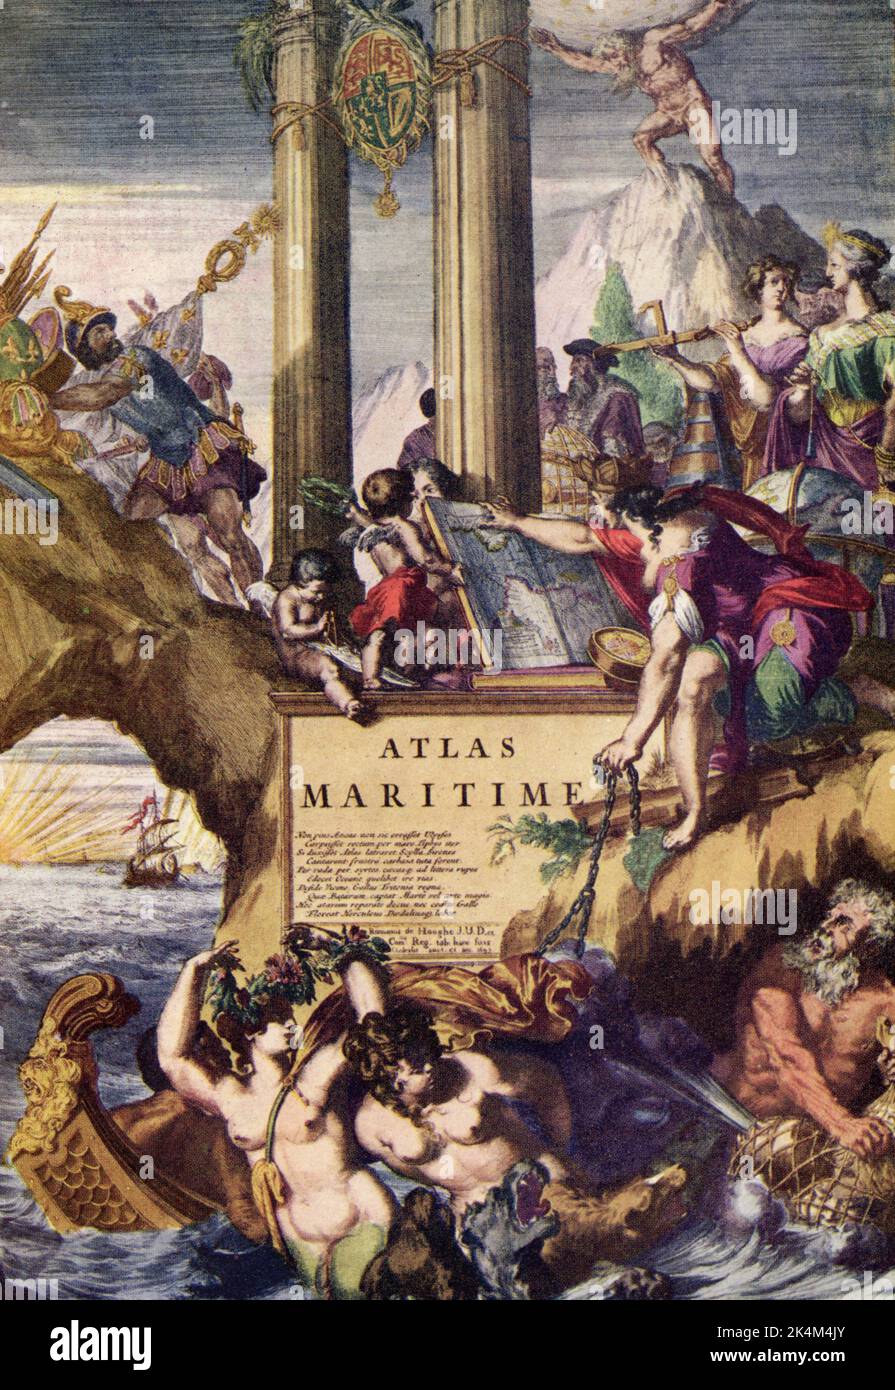 Atlas Maritime, 1693. By Pierre Mortier (1661-1711). The frontispiece of Atlas Maritime, 1693. Stock Photo